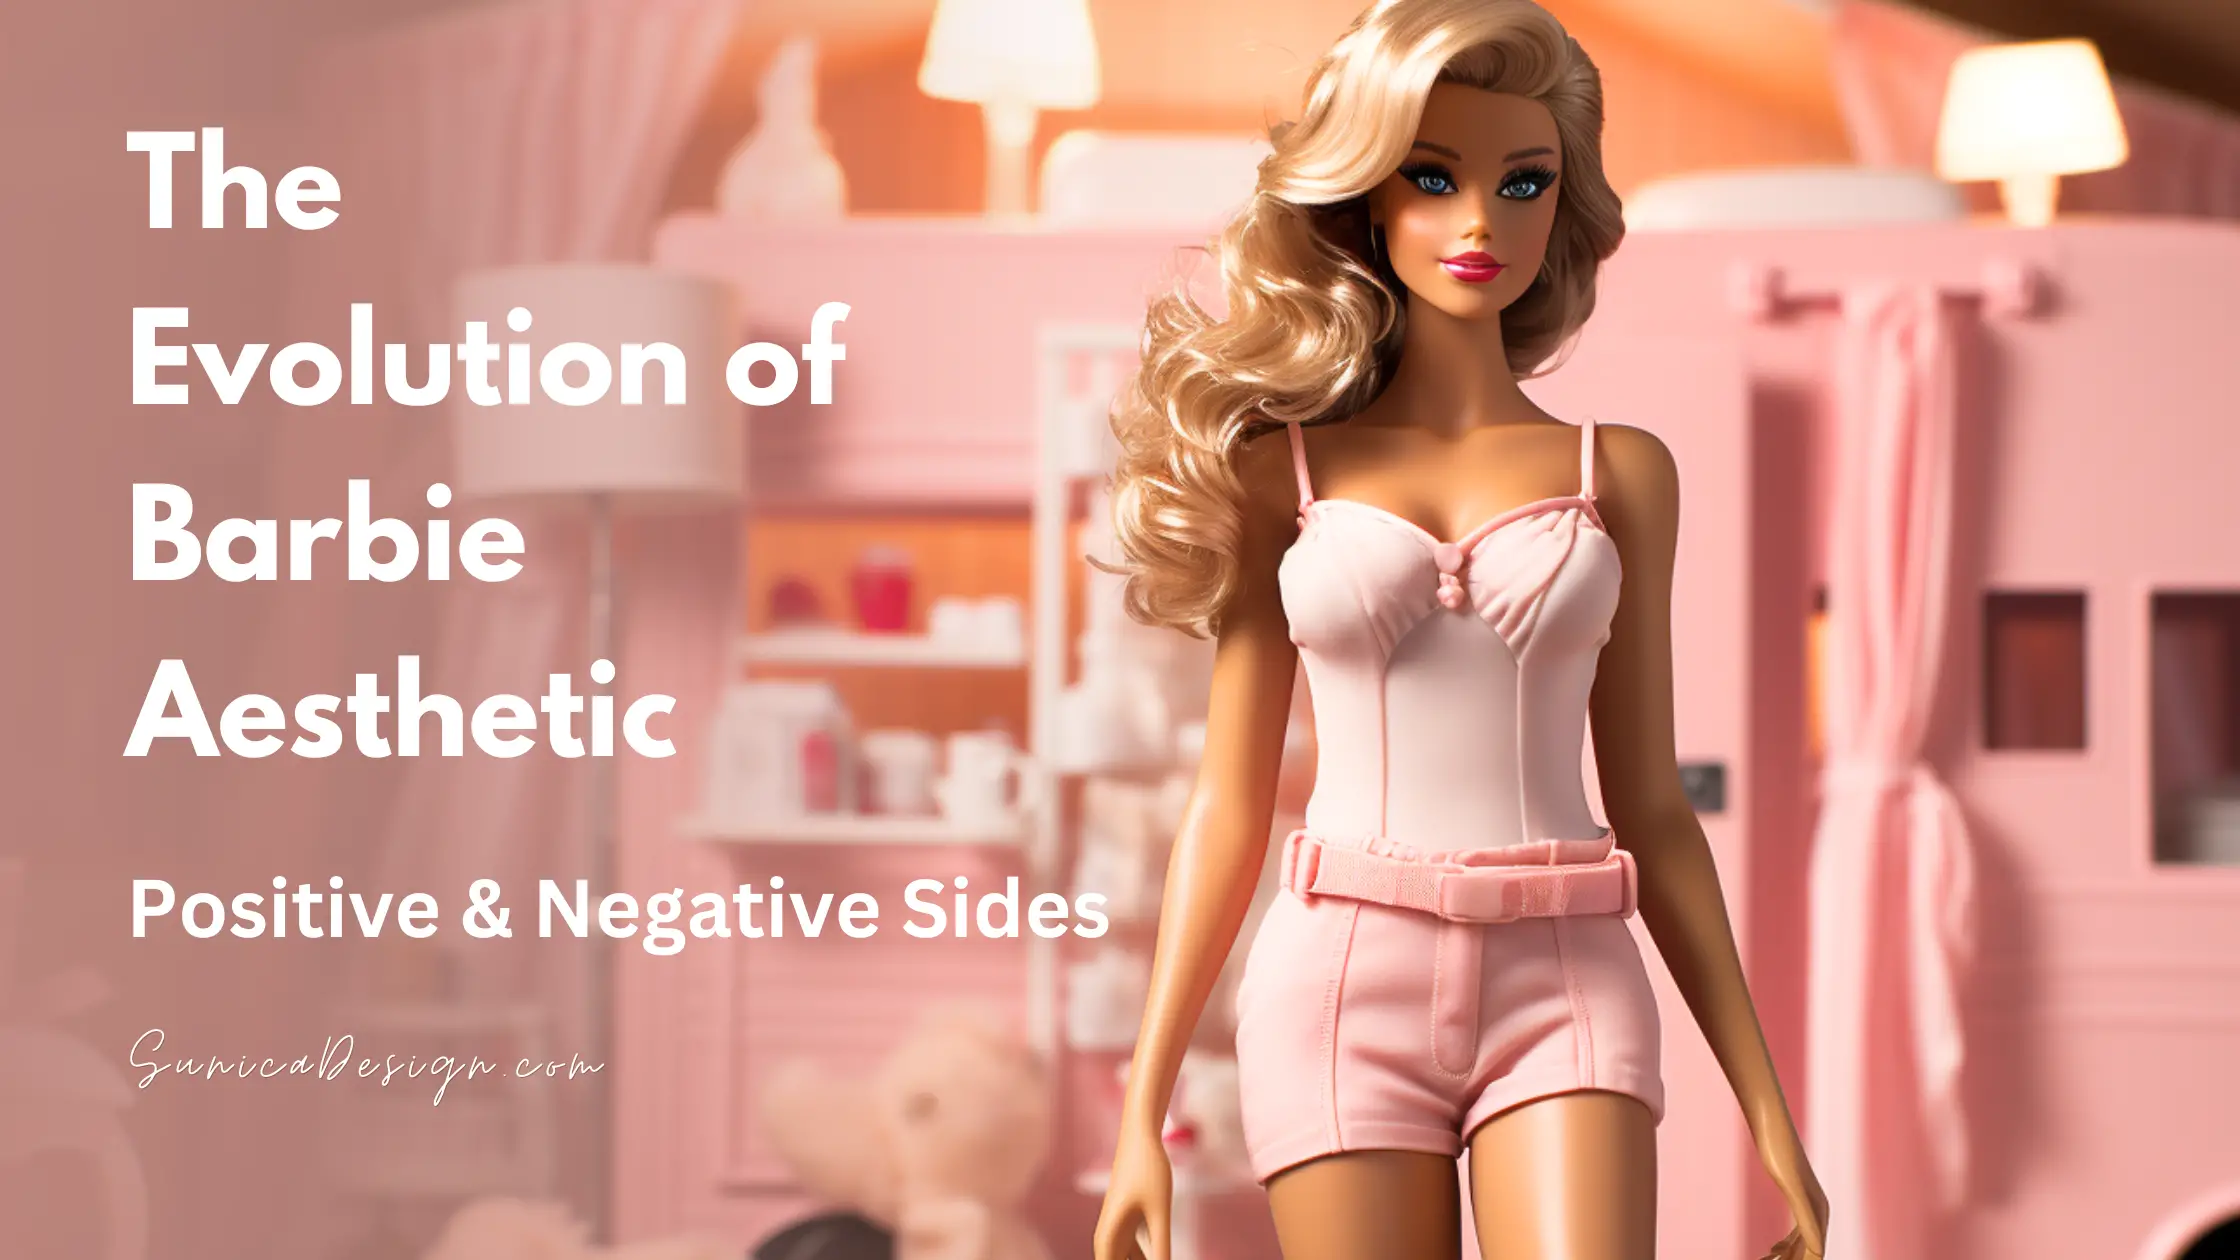 The Evolution of Barbie Aesthetic: Positive & Negative Sides